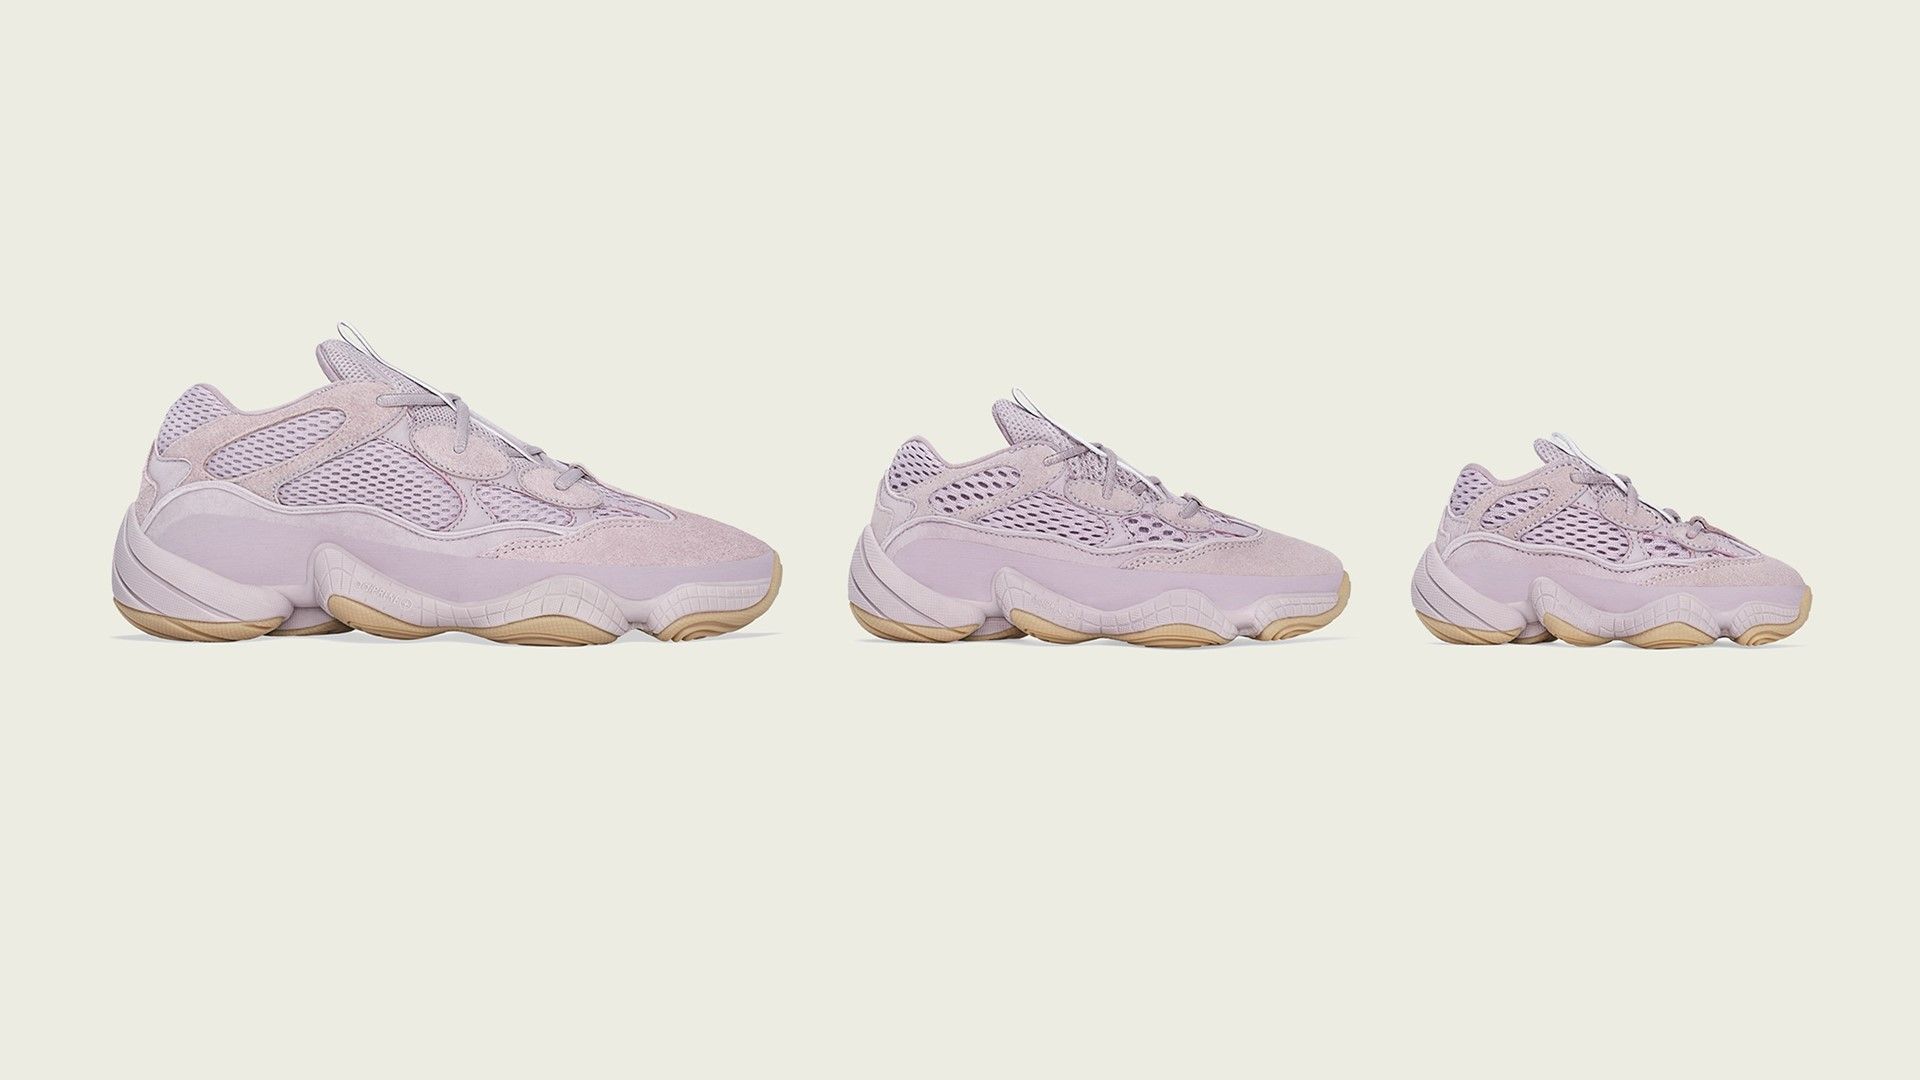 adidas + KANYE WEST announce the YEEZY 500 Soft Vision